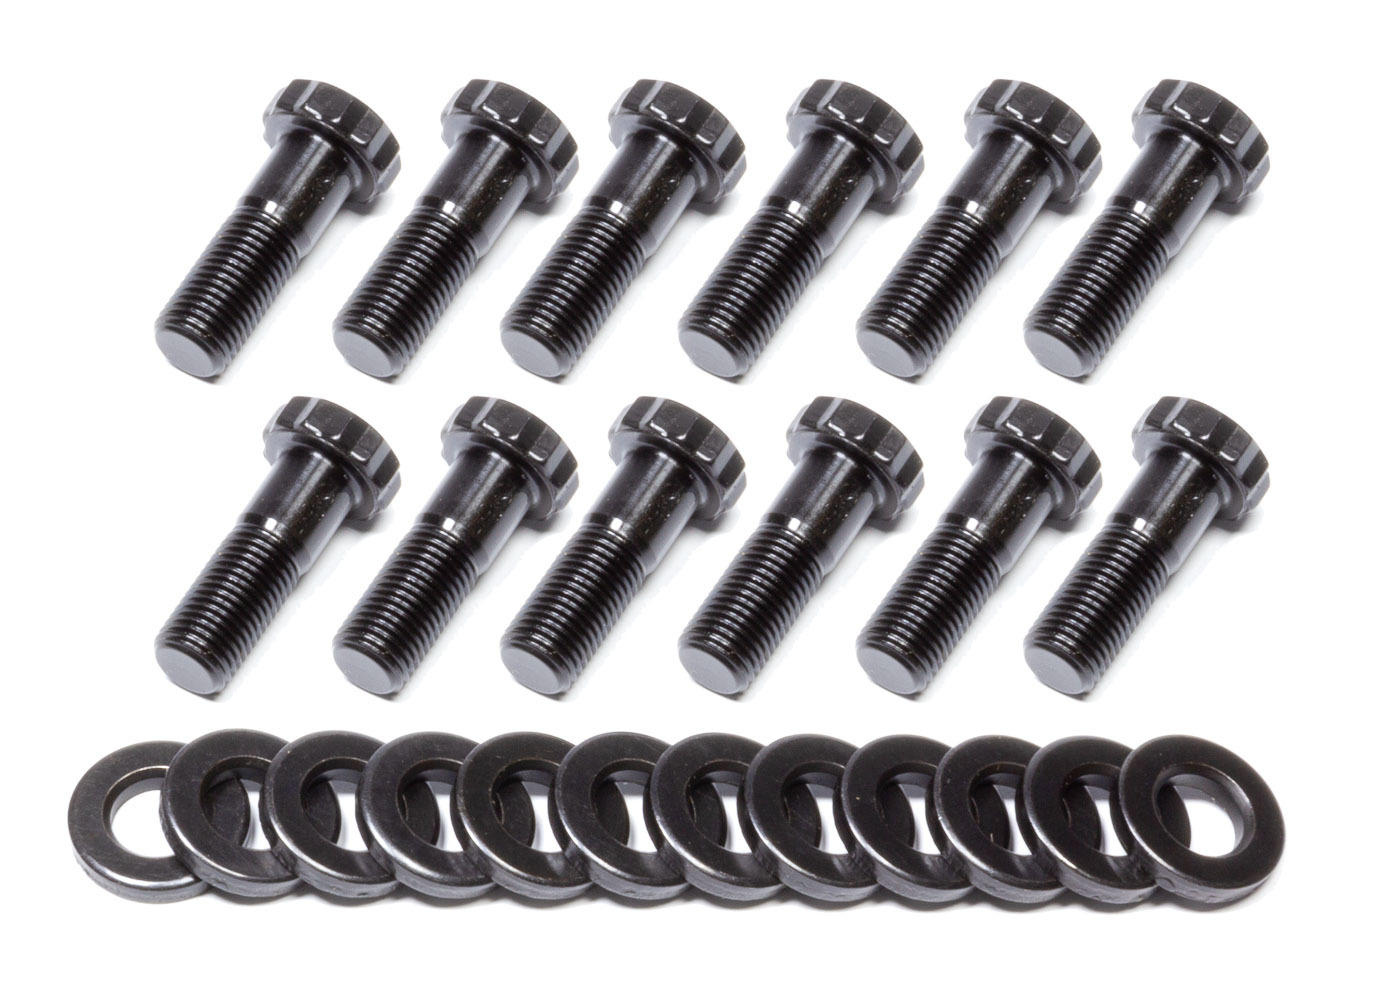 Tiger Quick Change 2055 - Ring Gear Bolt Kit, 3/8-24 in Thread, 1.312 in Long, 12 Point Head, Chromoly, Black Oxide, Mopar 7-1/4 in and 8-3/4 in, Kit